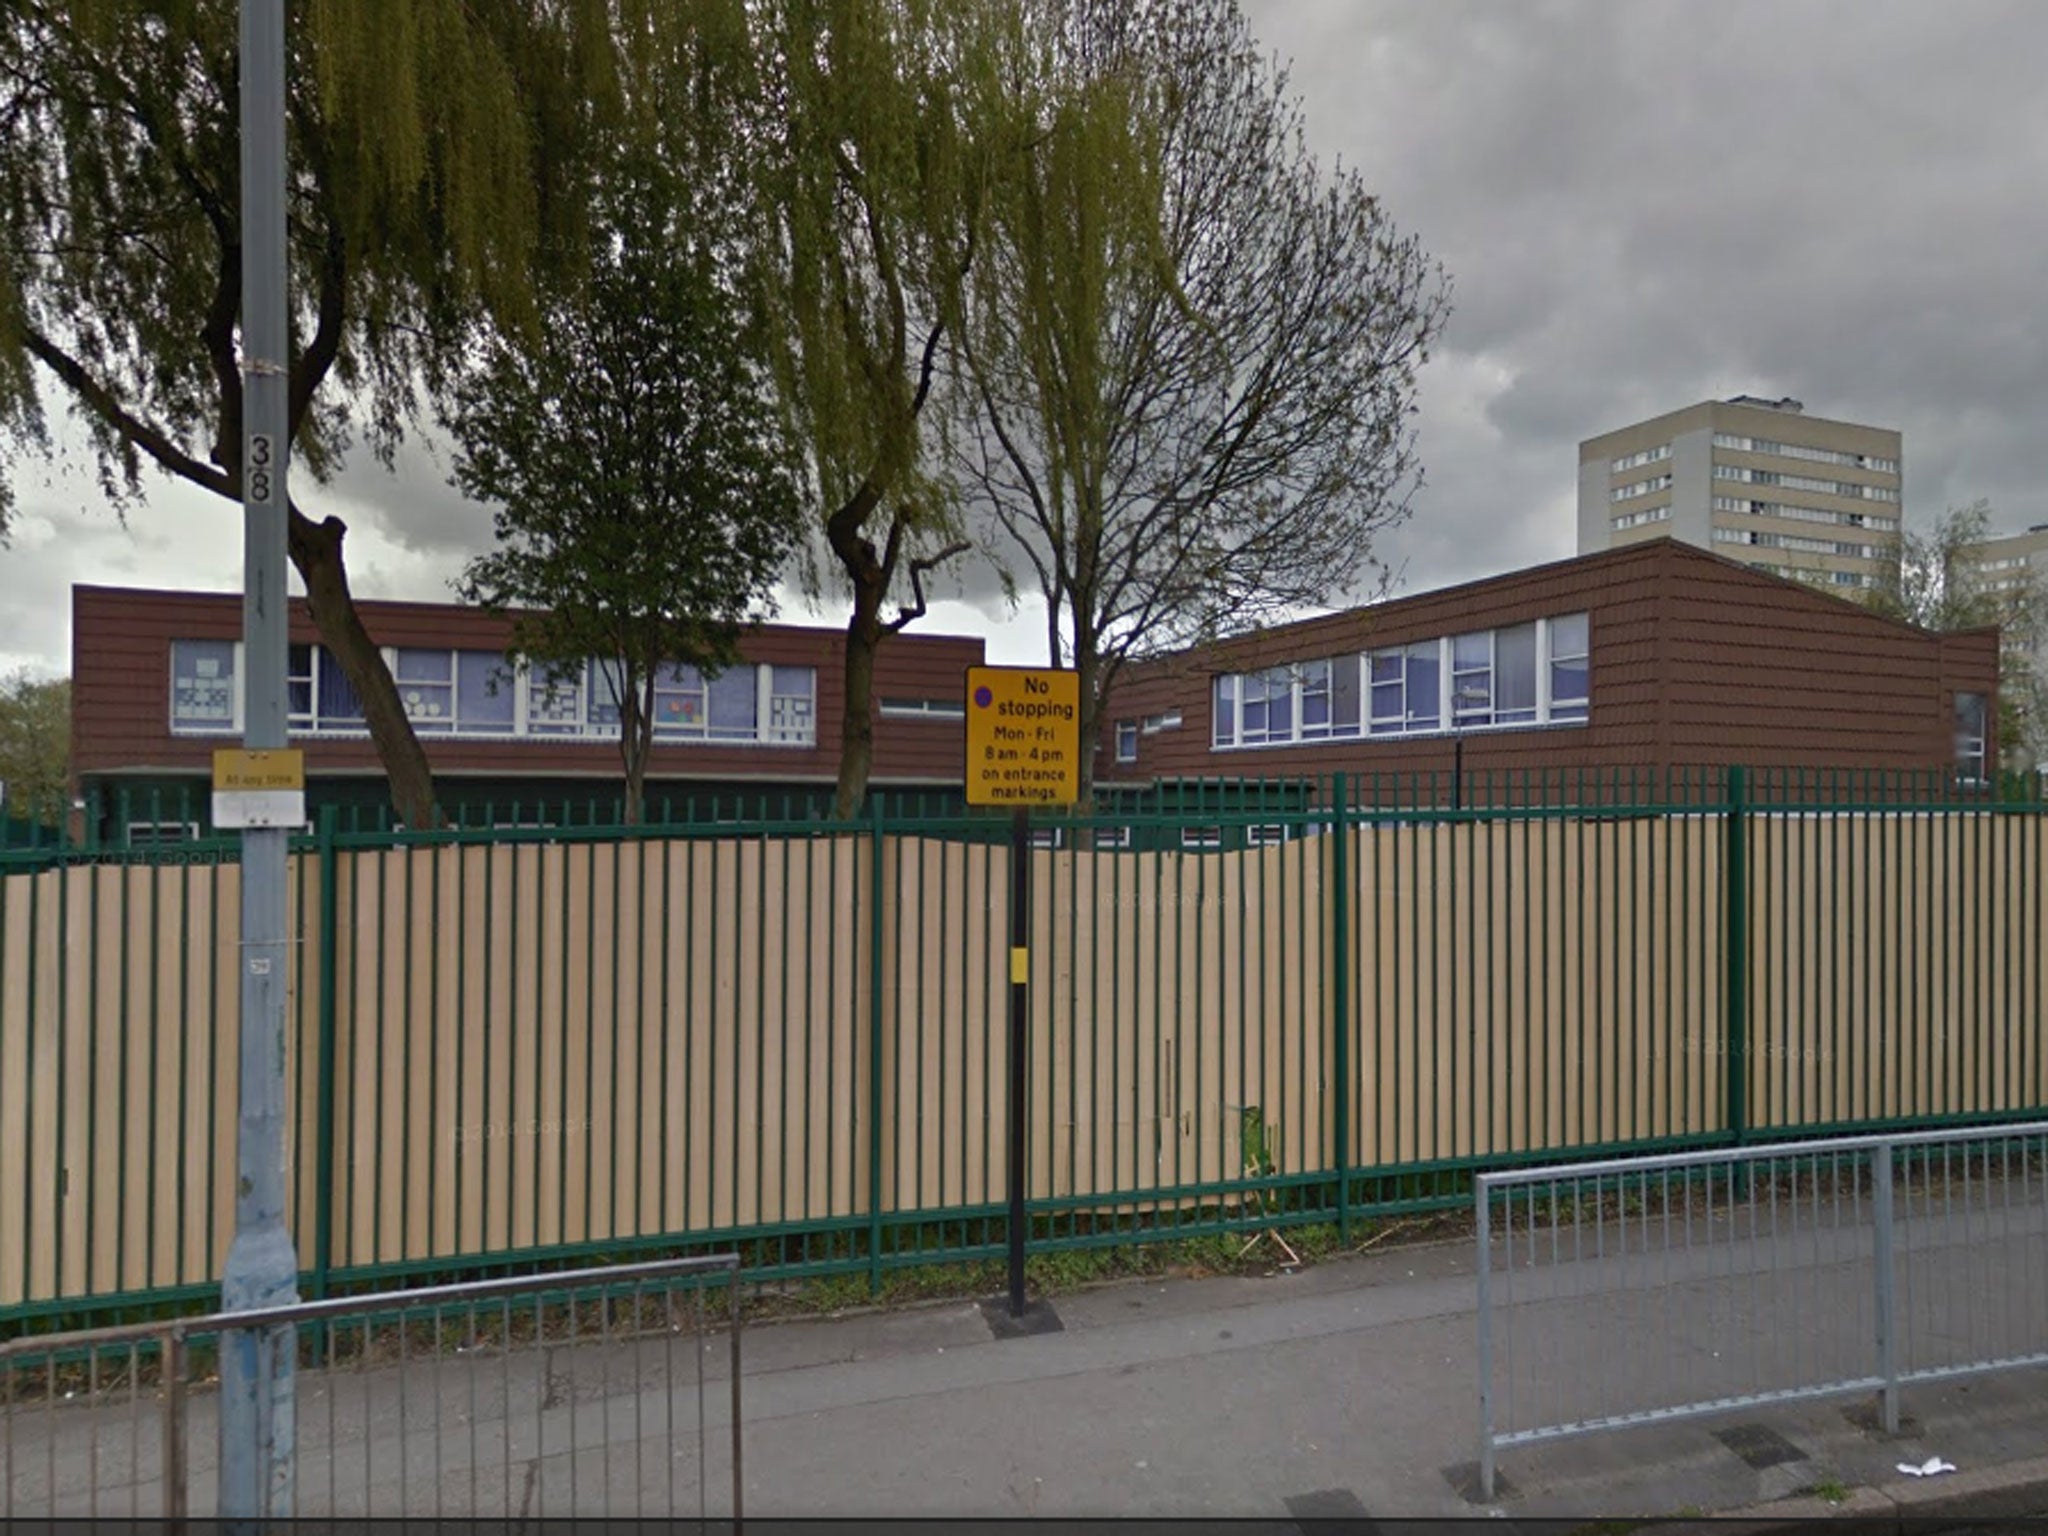 Chilwell Croft Academy is the latest secular state school in Birmingham to be embroiled in controversy